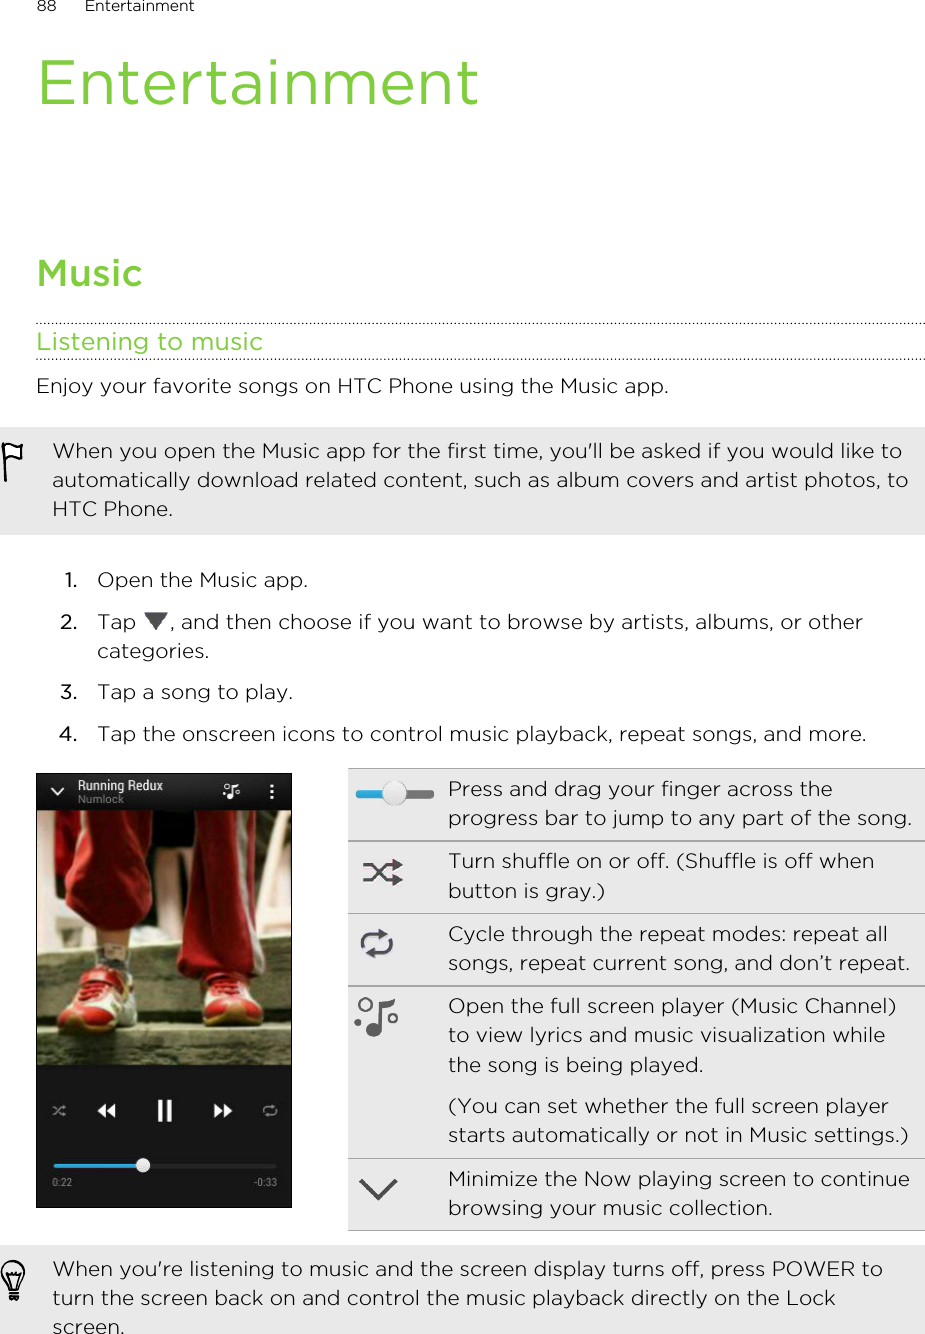 EntertainmentMusicListening to musicEnjoy your favorite songs on HTC Phone using the Music app.When you open the Music app for the first time, you&apos;ll be asked if you would like toautomatically download related content, such as album covers and artist photos, toHTC Phone.1. Open the Music app.2. Tap  , and then choose if you want to browse by artists, albums, or othercategories.3. Tap a song to play.4. Tap the onscreen icons to control music playback, repeat songs, and more.Press and drag your finger across theprogress bar to jump to any part of the song.Turn shuffle on or off. (Shuffle is off whenbutton is gray.)Cycle through the repeat modes: repeat allsongs, repeat current song, and don’t repeat.Open the full screen player (Music Channel)to view lyrics and music visualization whilethe song is being played.(You can set whether the full screen playerstarts automatically or not in Music settings.)Minimize the Now playing screen to continuebrowsing your music collection.When you&apos;re listening to music and the screen display turns off, press POWER toturn the screen back on and control the music playback directly on the Lockscreen.88 EntertainmentHTC Confidential for Certification HTC Confidential for Certification